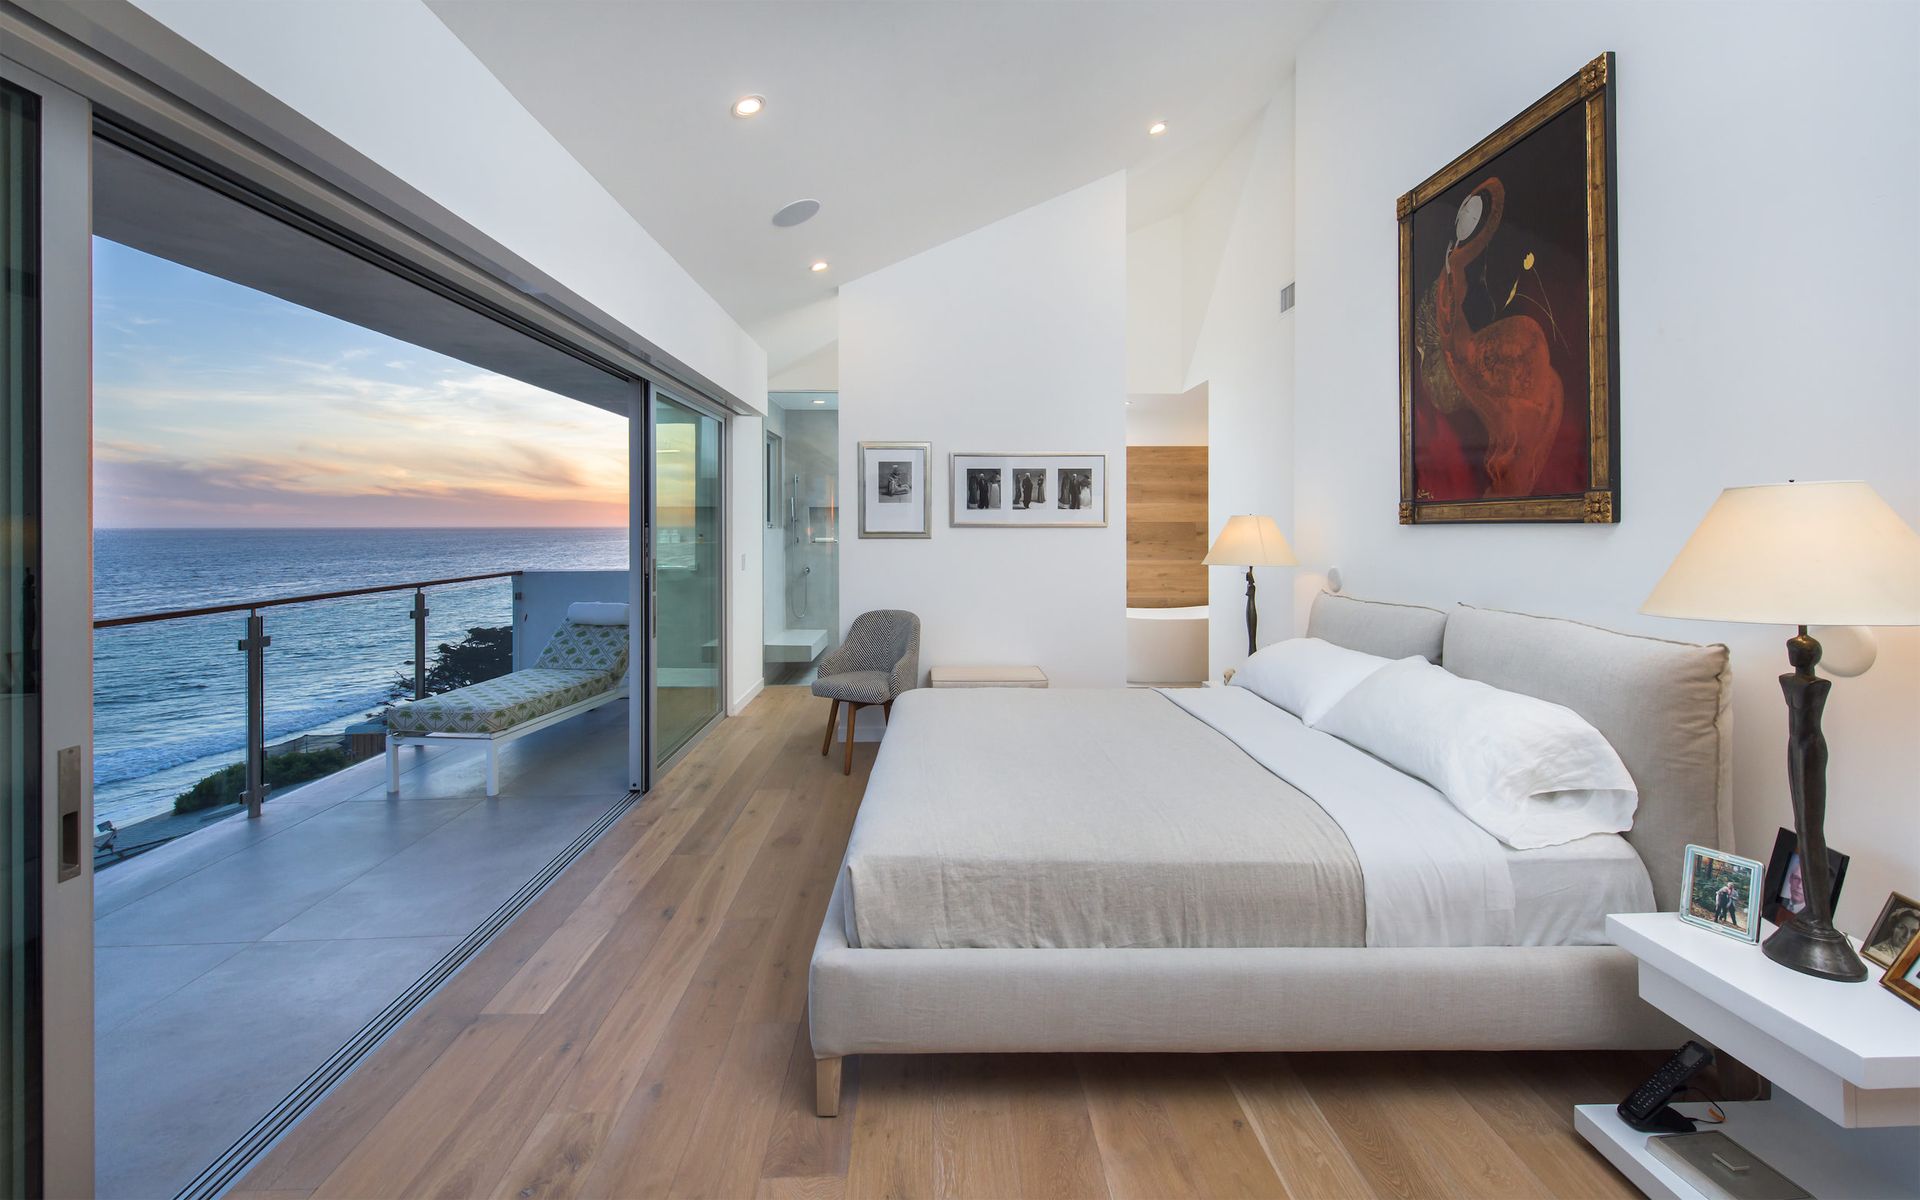 The bedroom of the Broad Beach Modern remodel in Malibu, CA, with a large bed and a balcony overlooking the ocean.